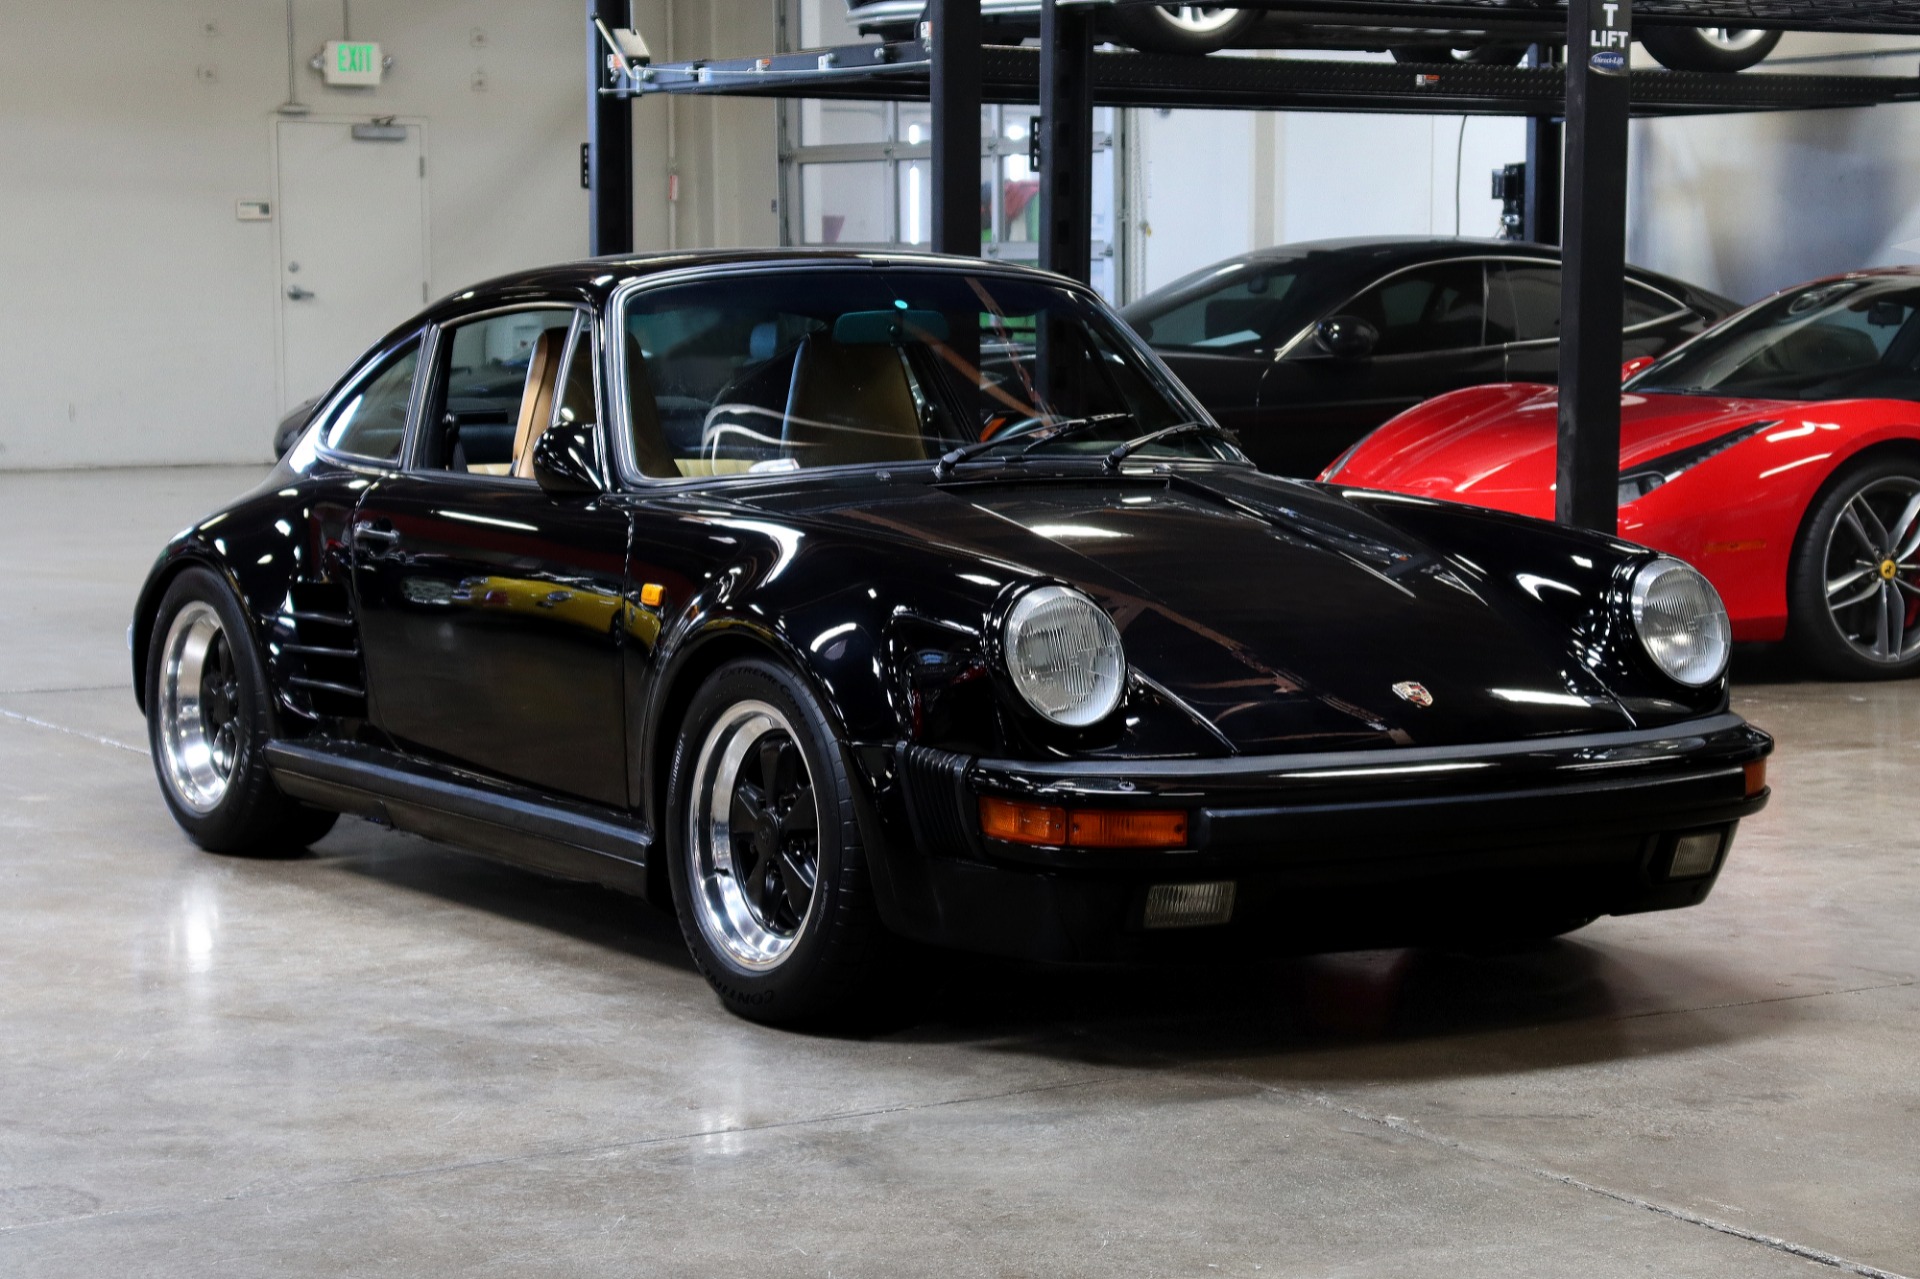 Used 1985 Porsche 911 Carrera M491 Turbo Look for sale Sold at San Francisco Sports Cars in San Carlos CA 94070 1